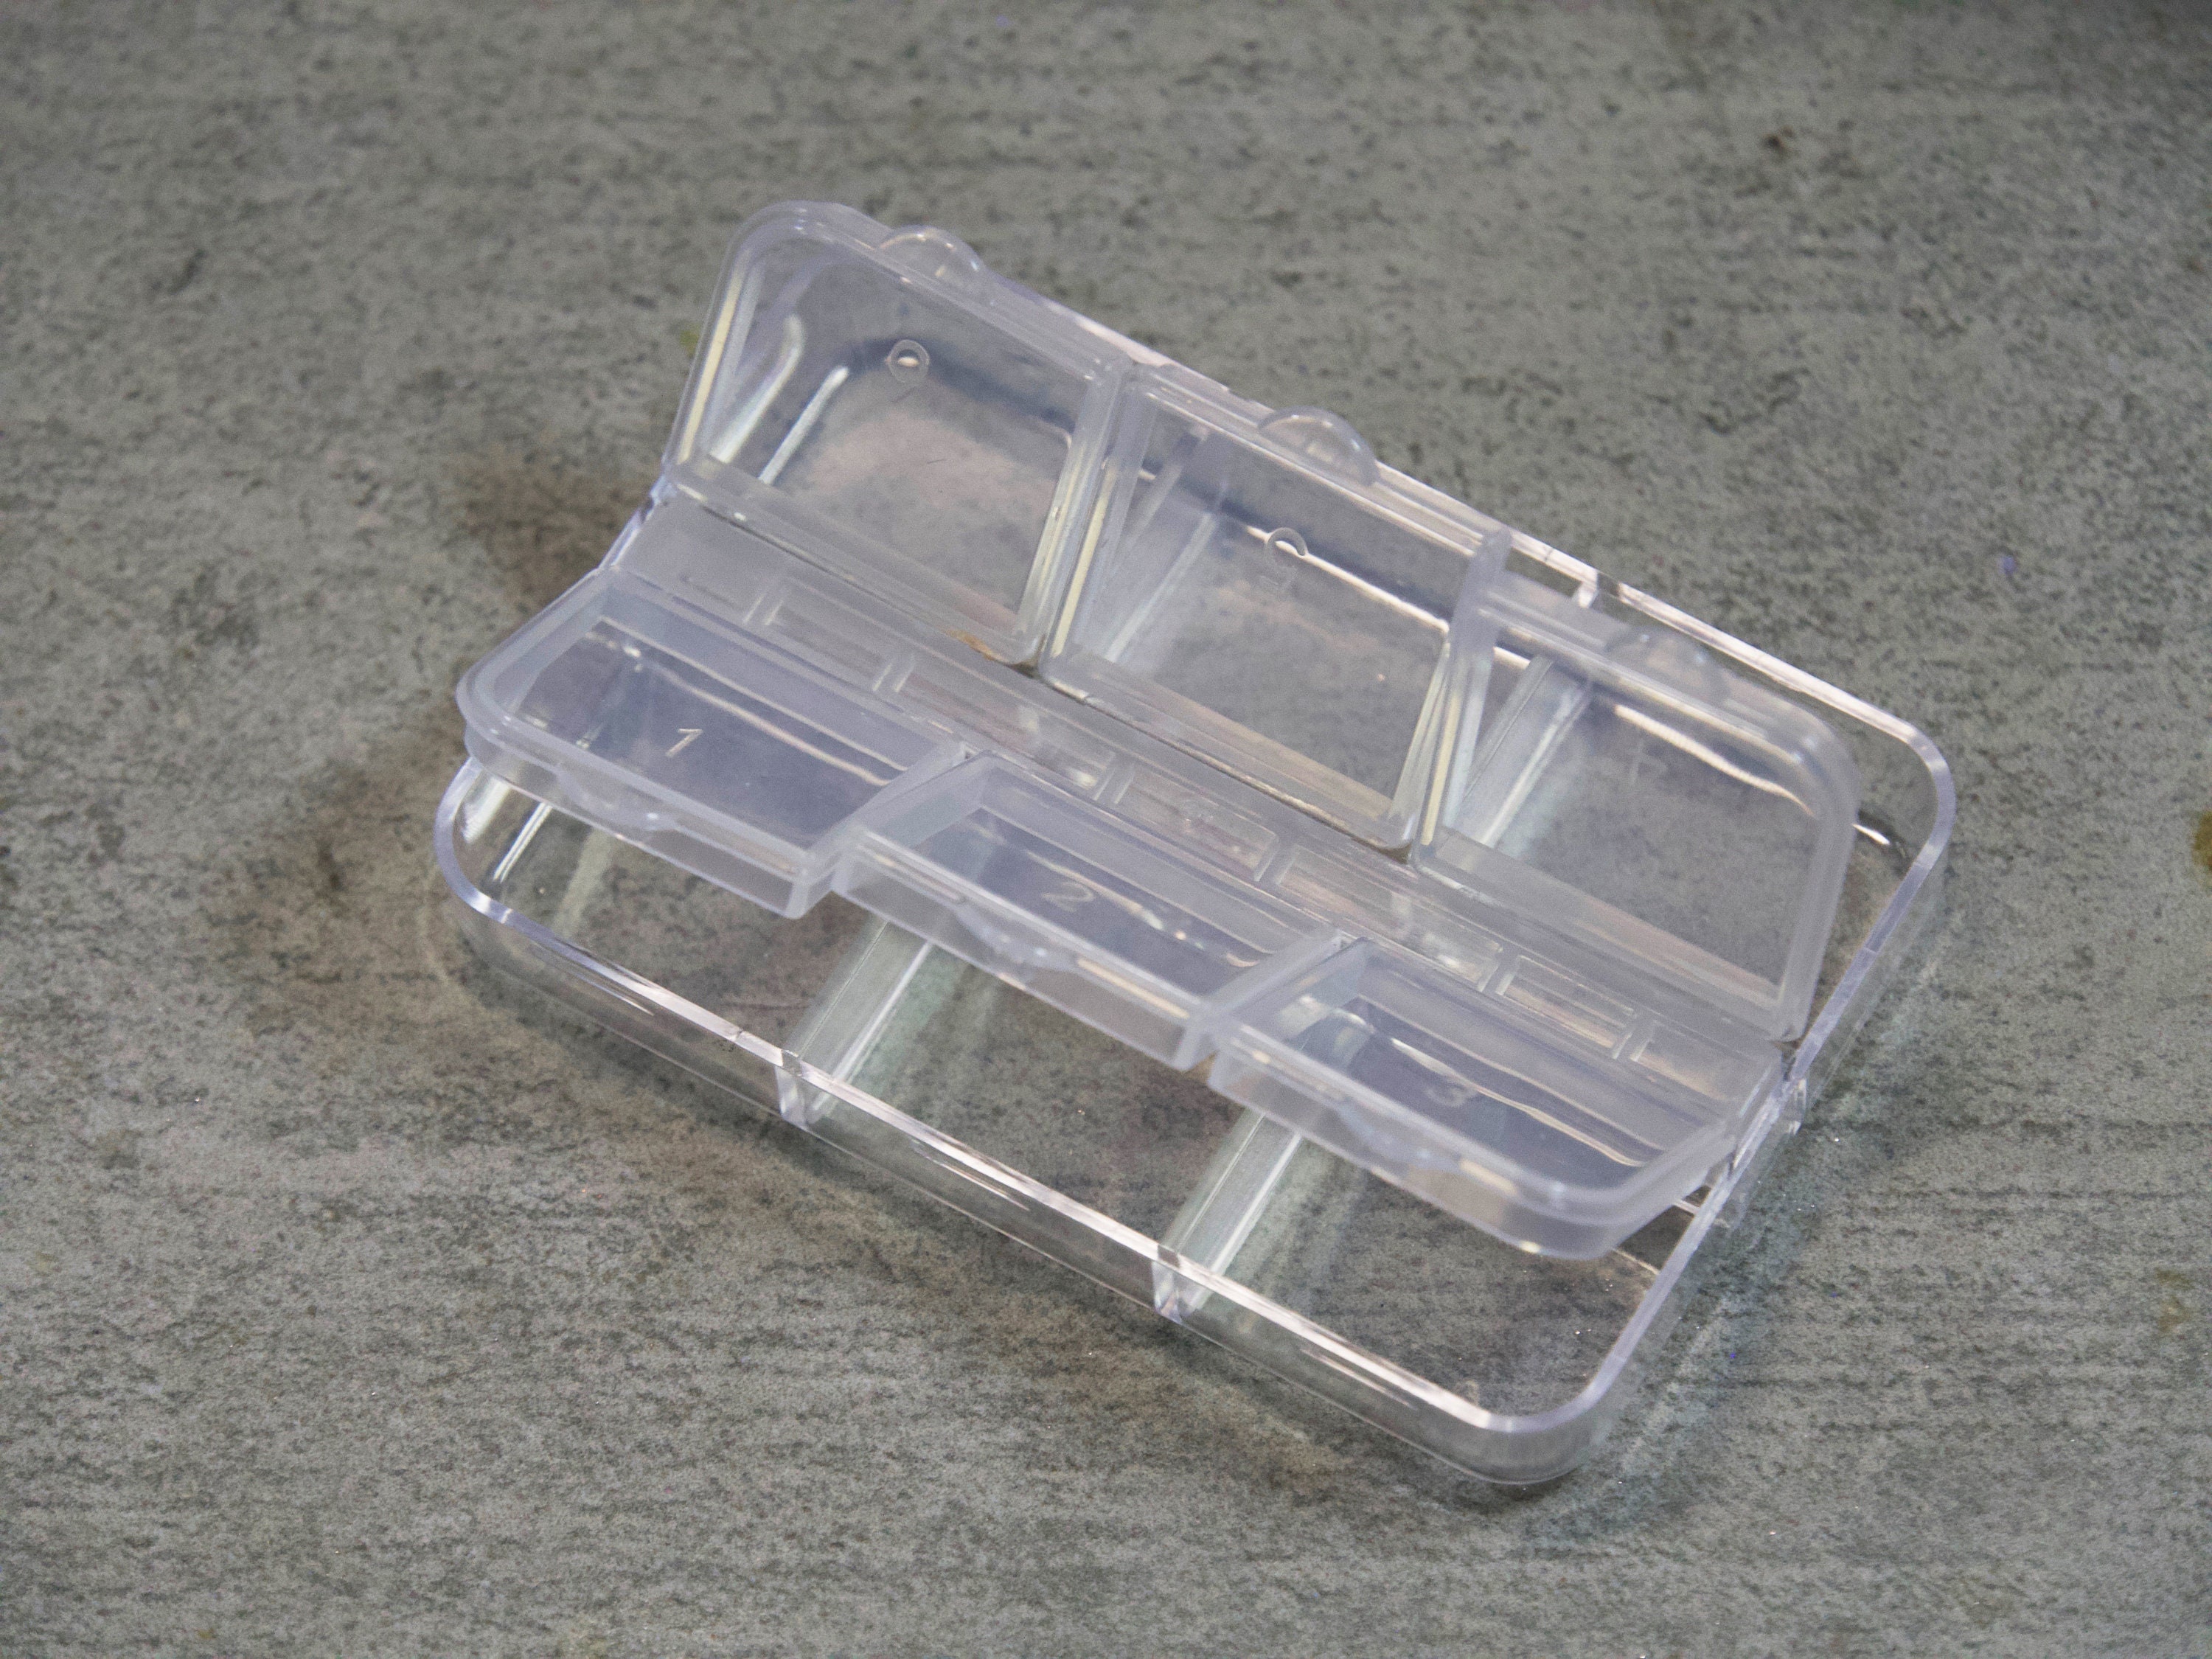 3D Printed Organizer for Altoid Tin Portable Storage With 8 Compartments 